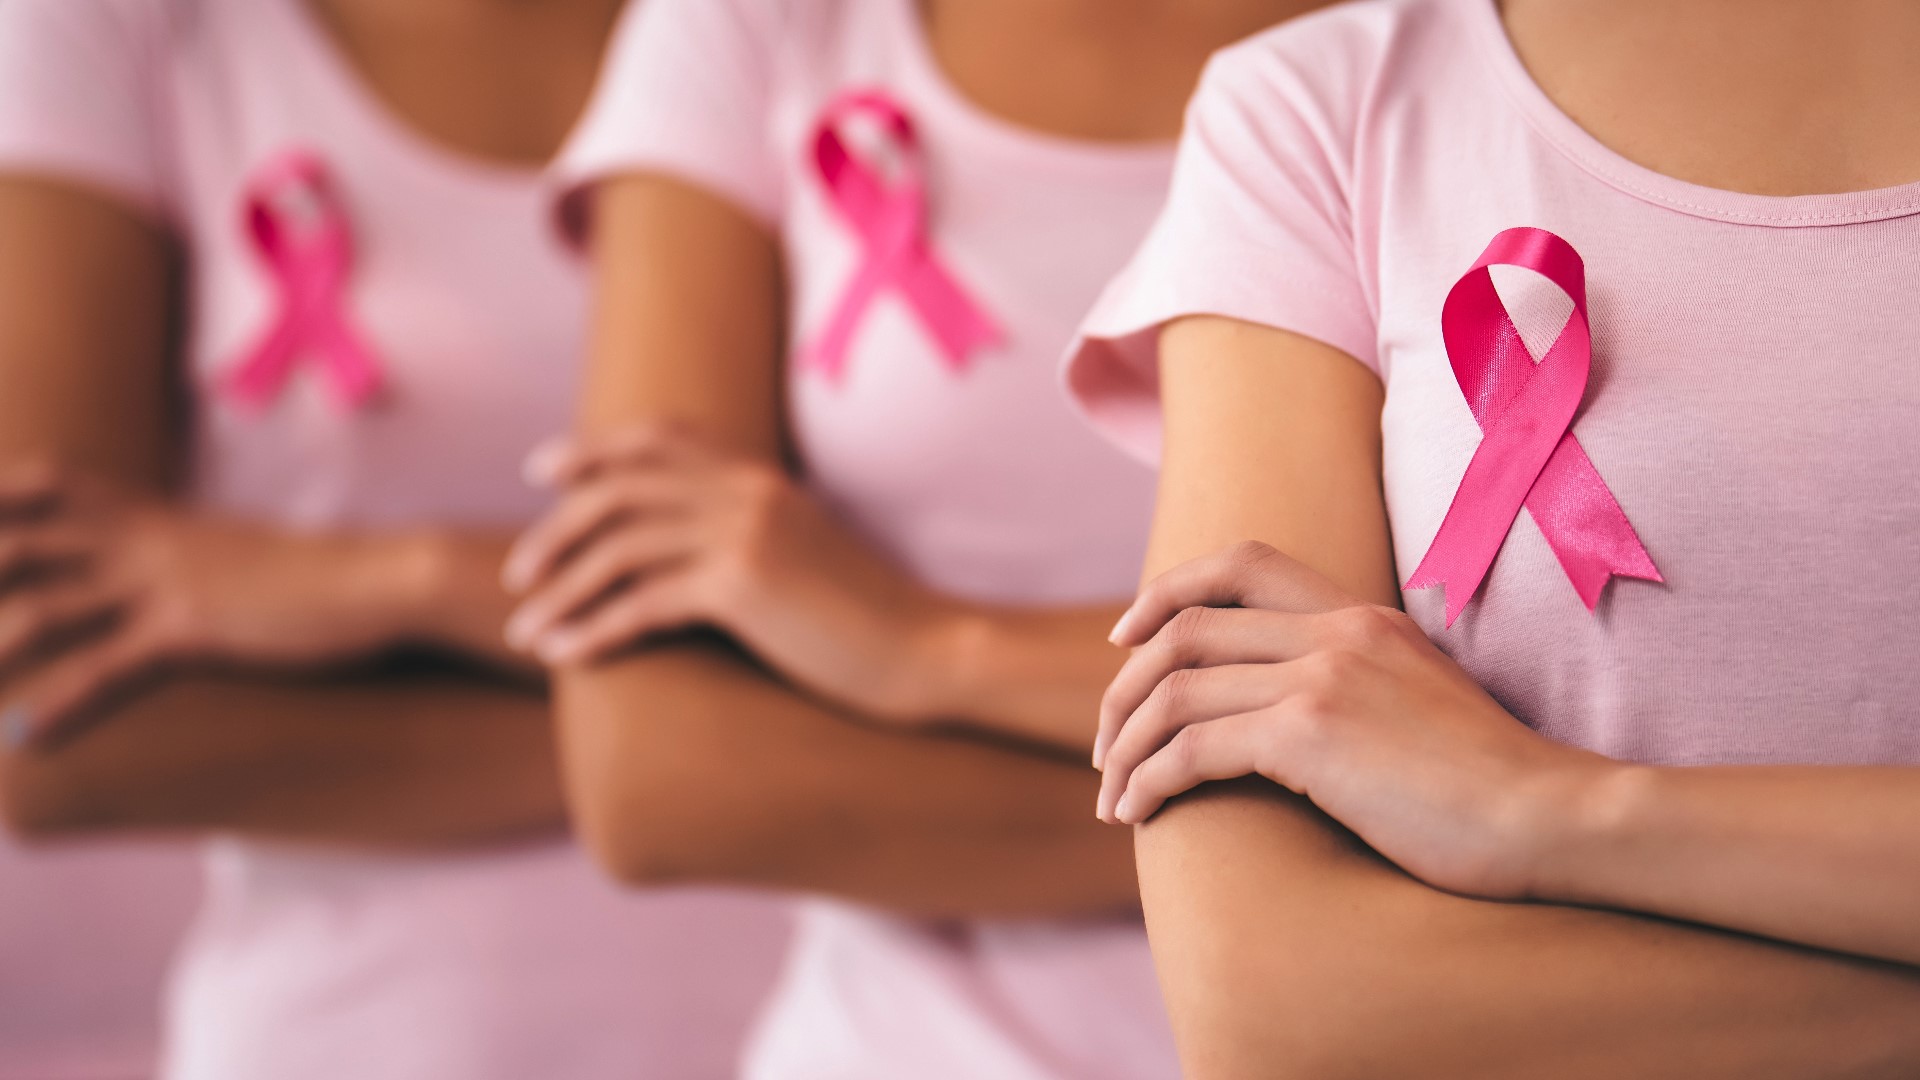 While the risk is still relatively low, young women often face breast cancers that can be more aggressive and more difficult to treat.